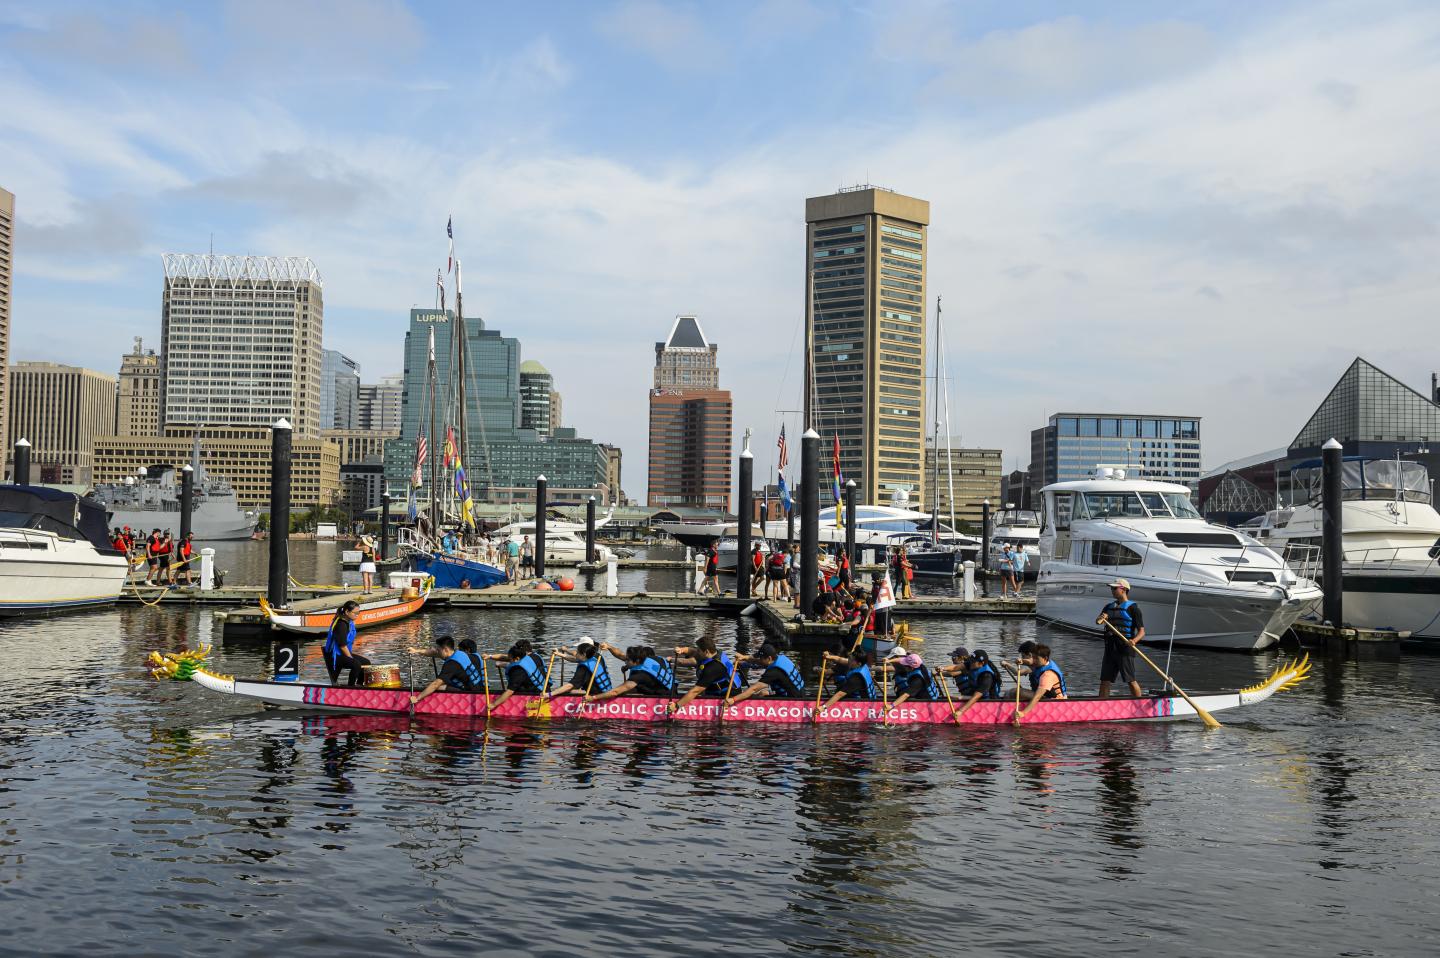 A dragon boat paddles past the docks in Baltimore